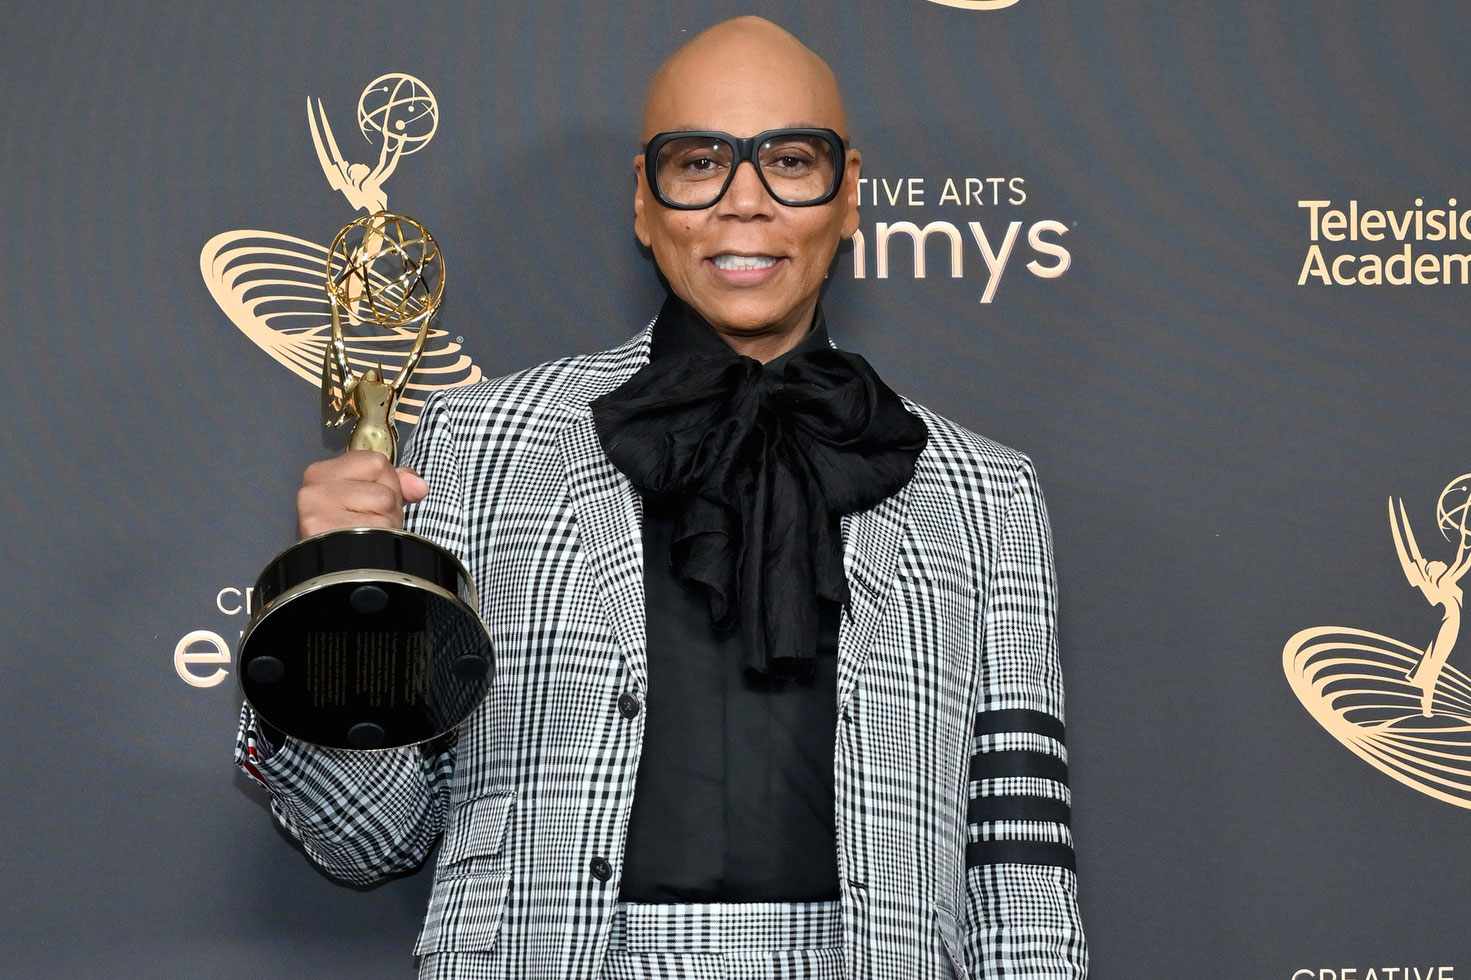 RuPaul at the 2022 Creative Arts Emmy Awards press room held at the Microsoft Theater on September 3, 2022 in Los Angeles, California. (Photo by Michael Buckner/Variety via Getty Images)